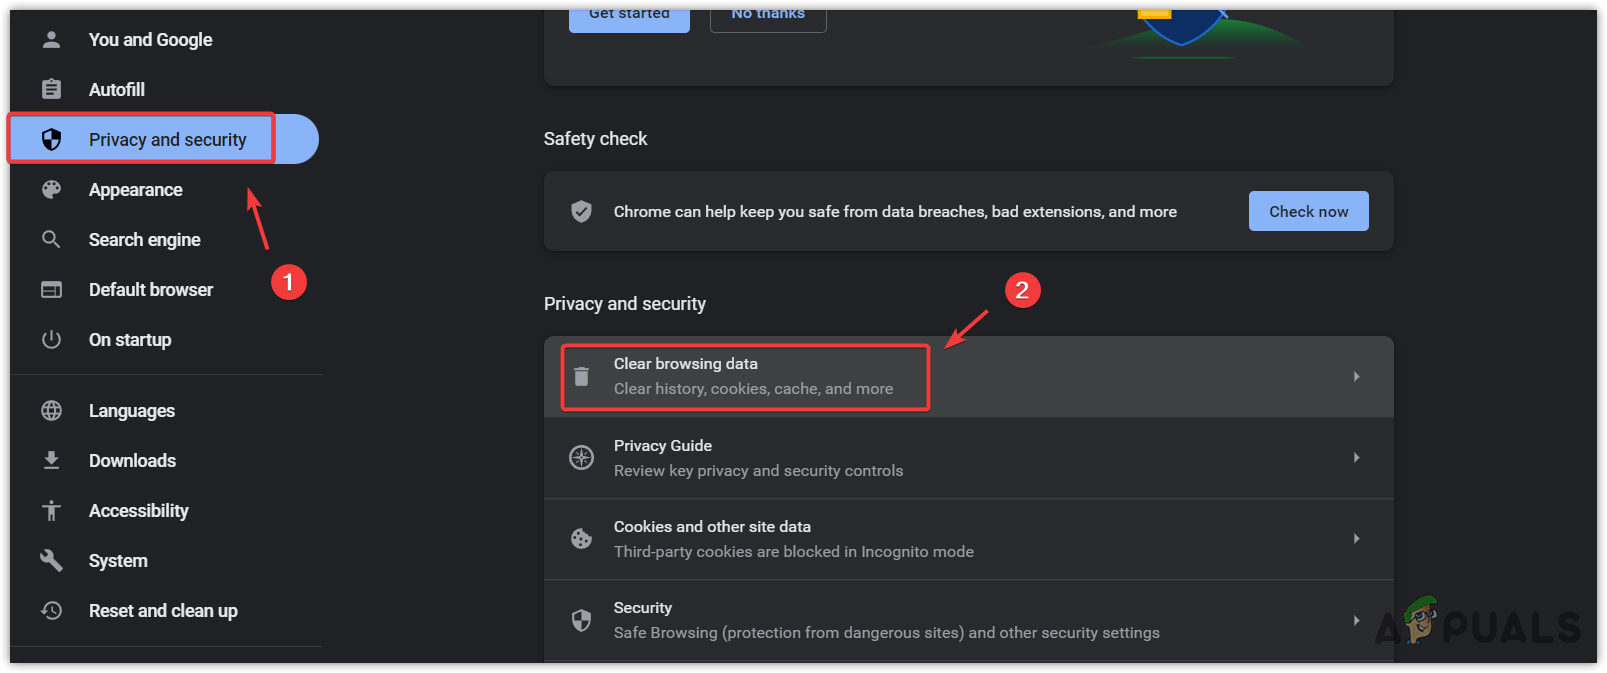 Opening clear browsing data settings on Google Chrome